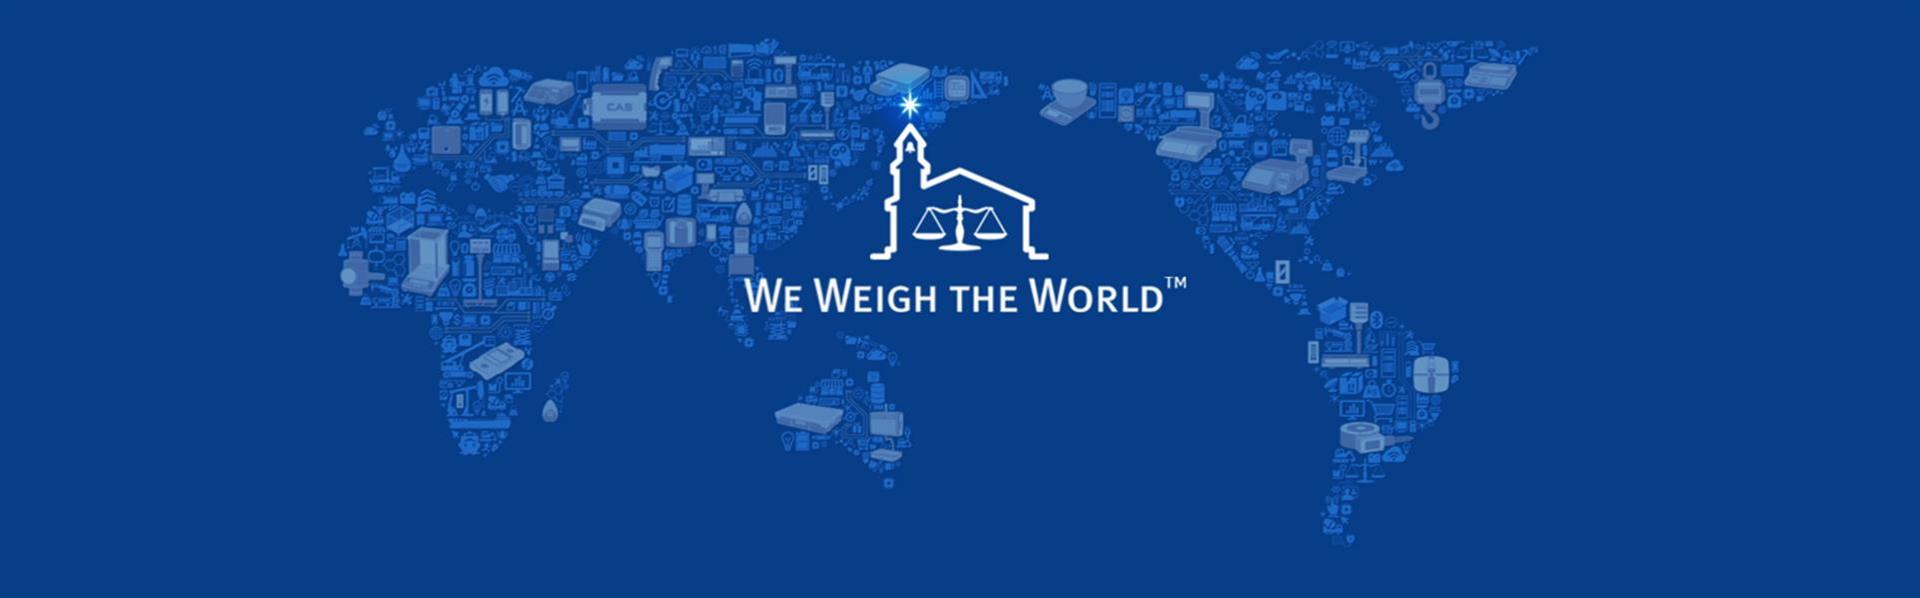 WE WEIGH THE WORLD